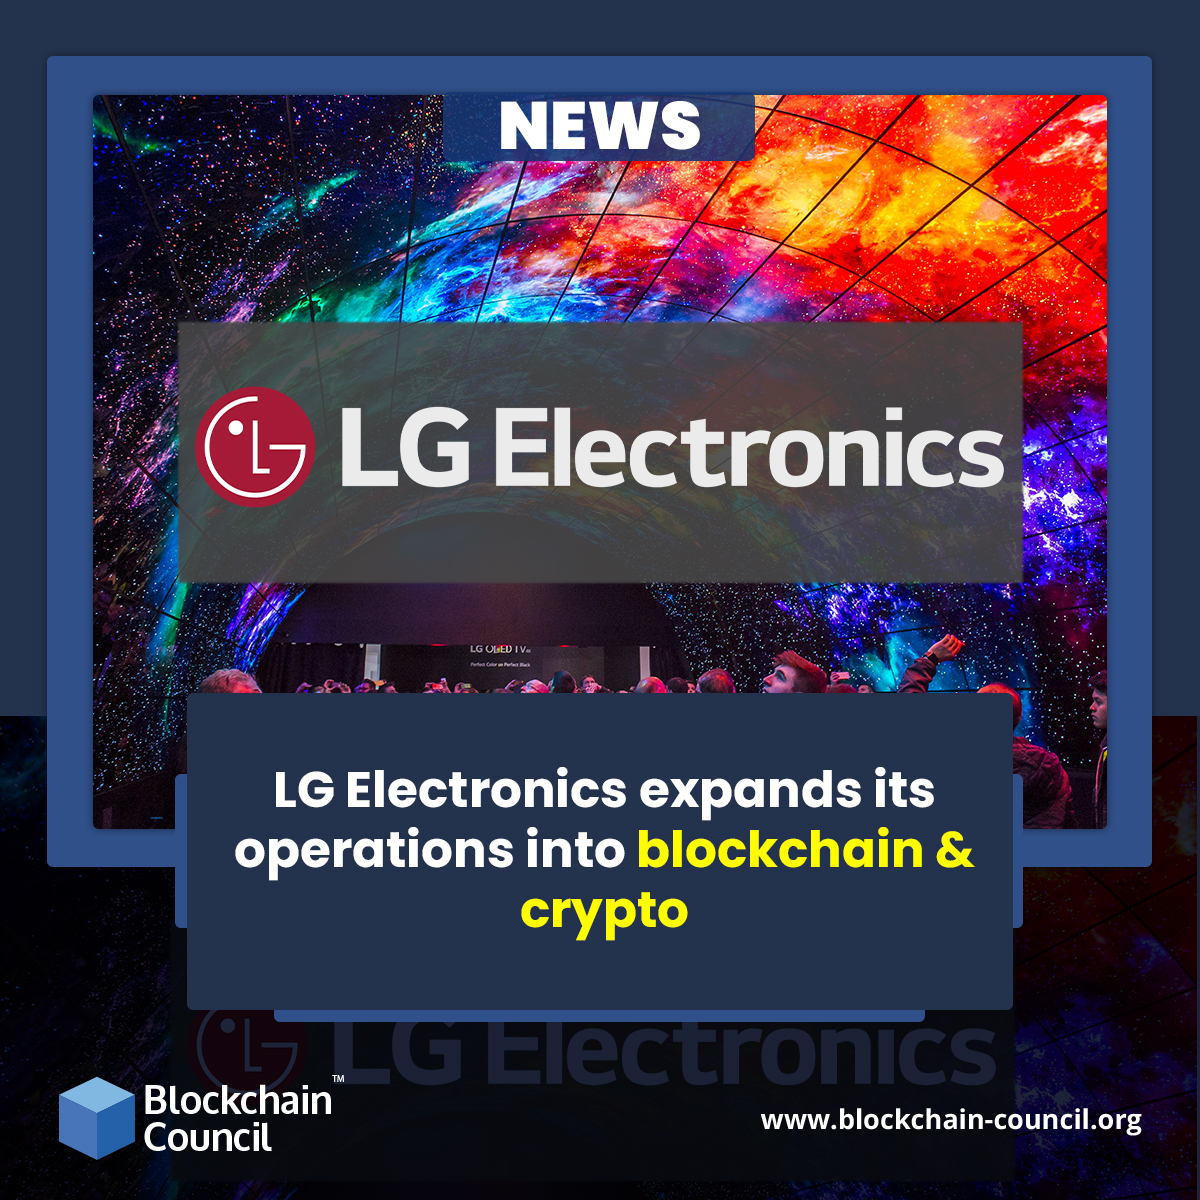 LG Electronics expands its operations into blockchain & crypto